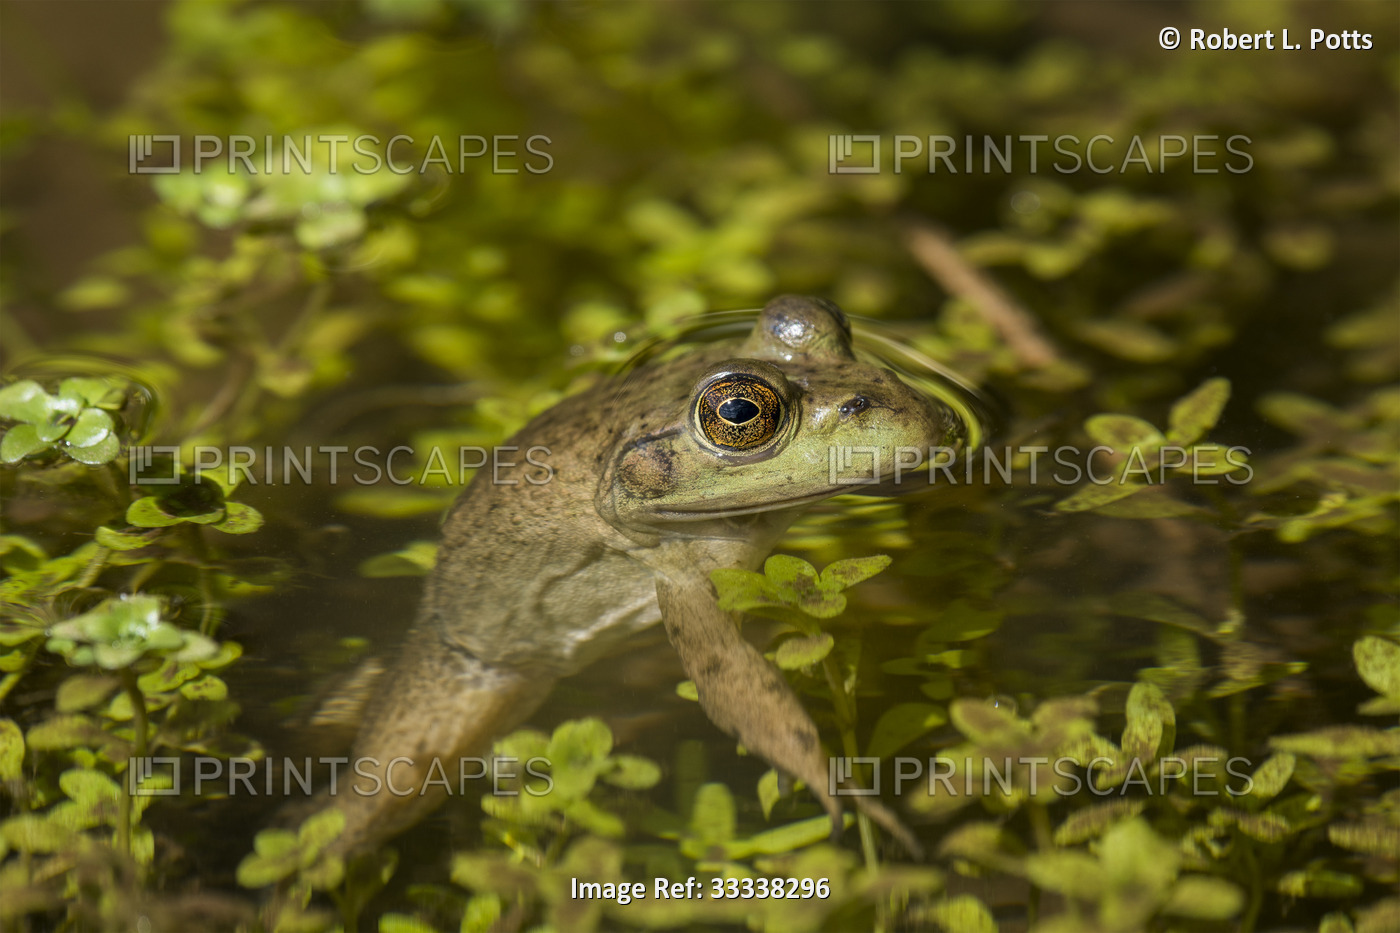 Close-up portrait of an American bullfrog (Lithobates catesbeianus) in the ...